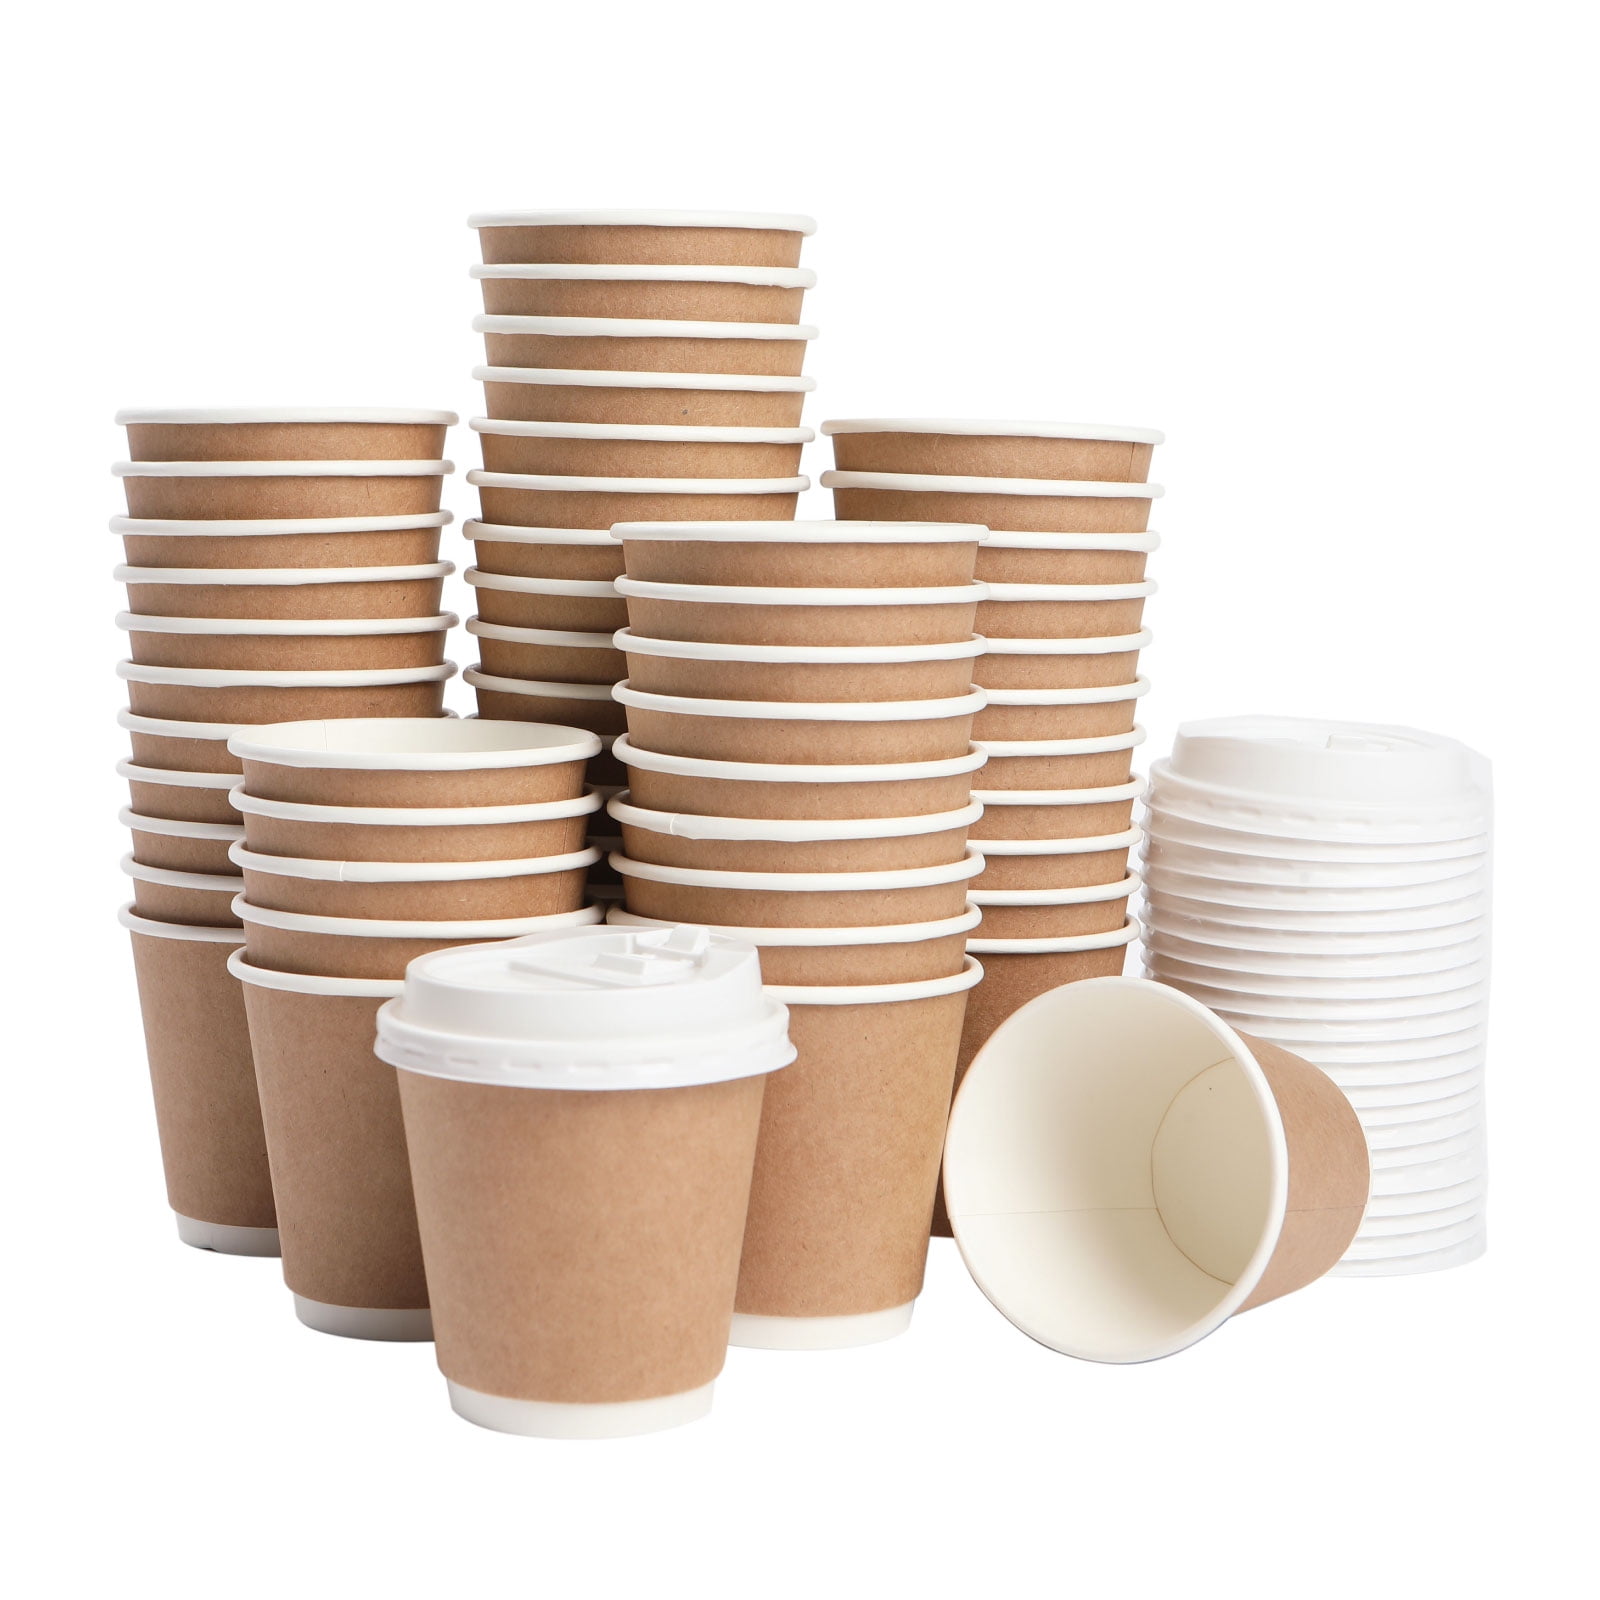 White Insulated Foam Cups 10oz 1000cs (10j10) — Janitorial Superstore